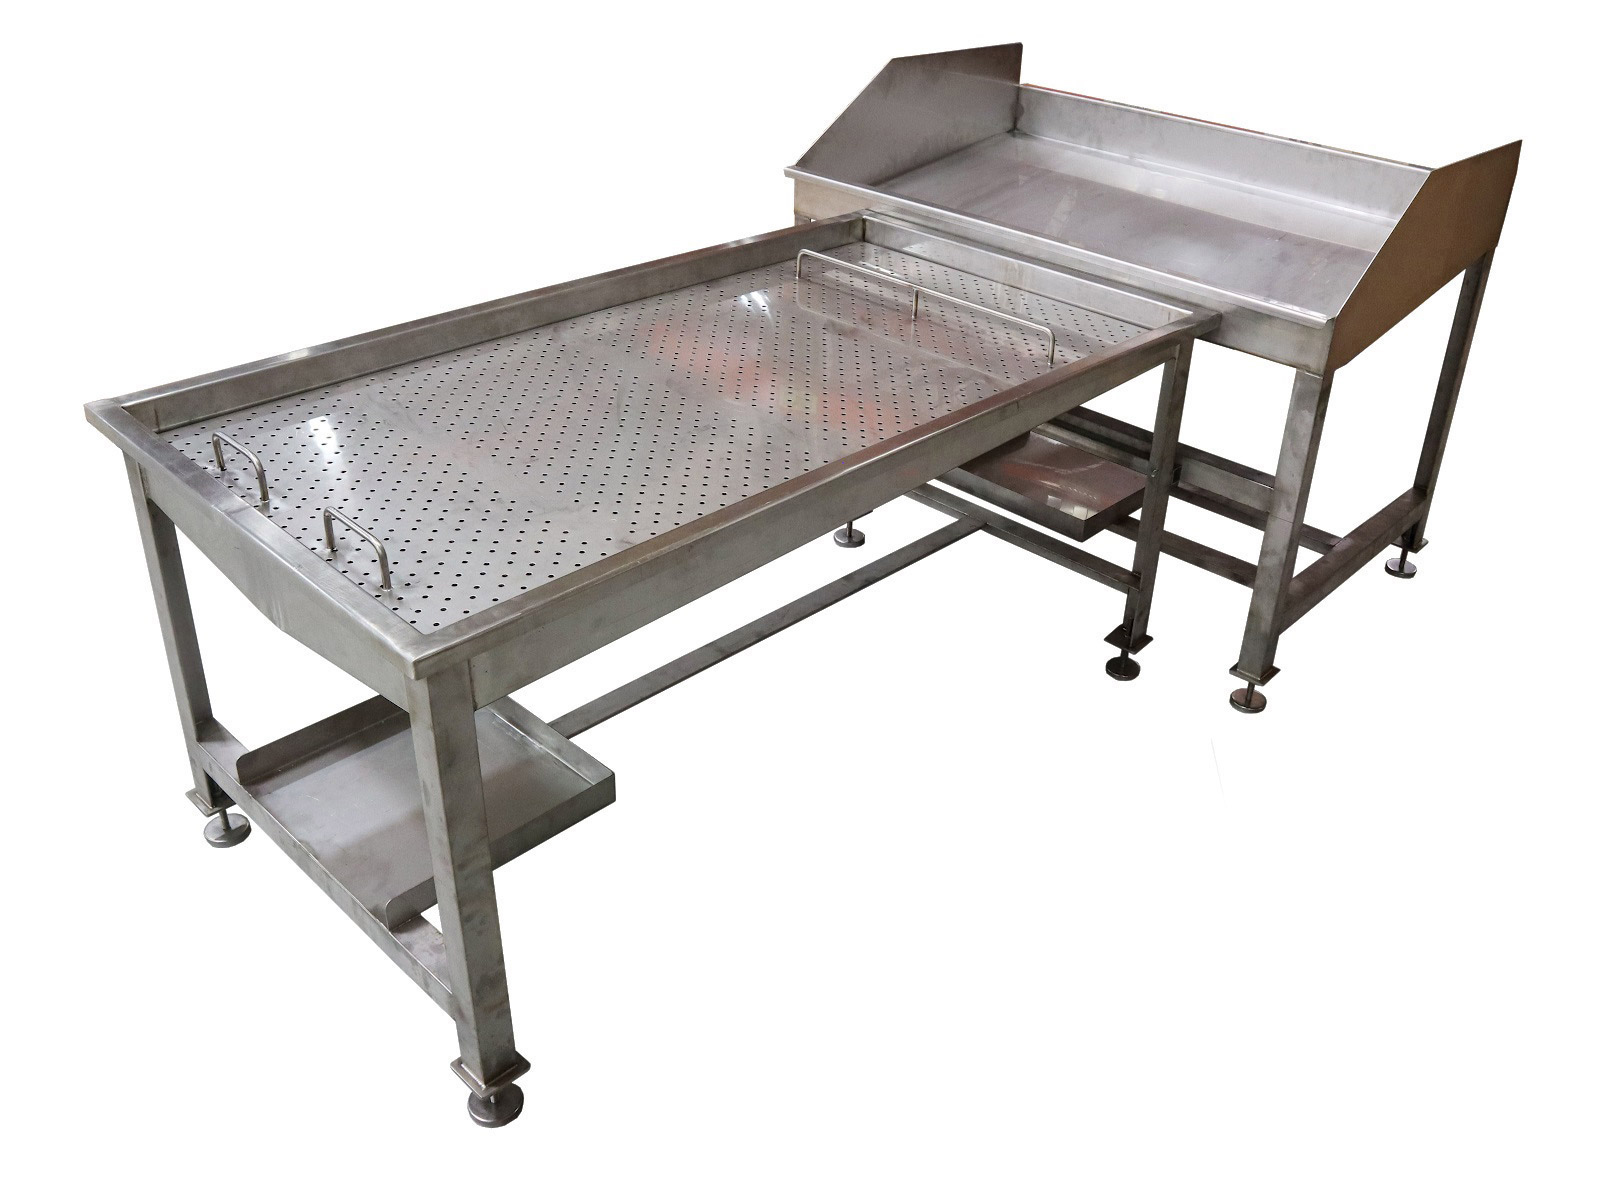 Processing table for commercial kitchen